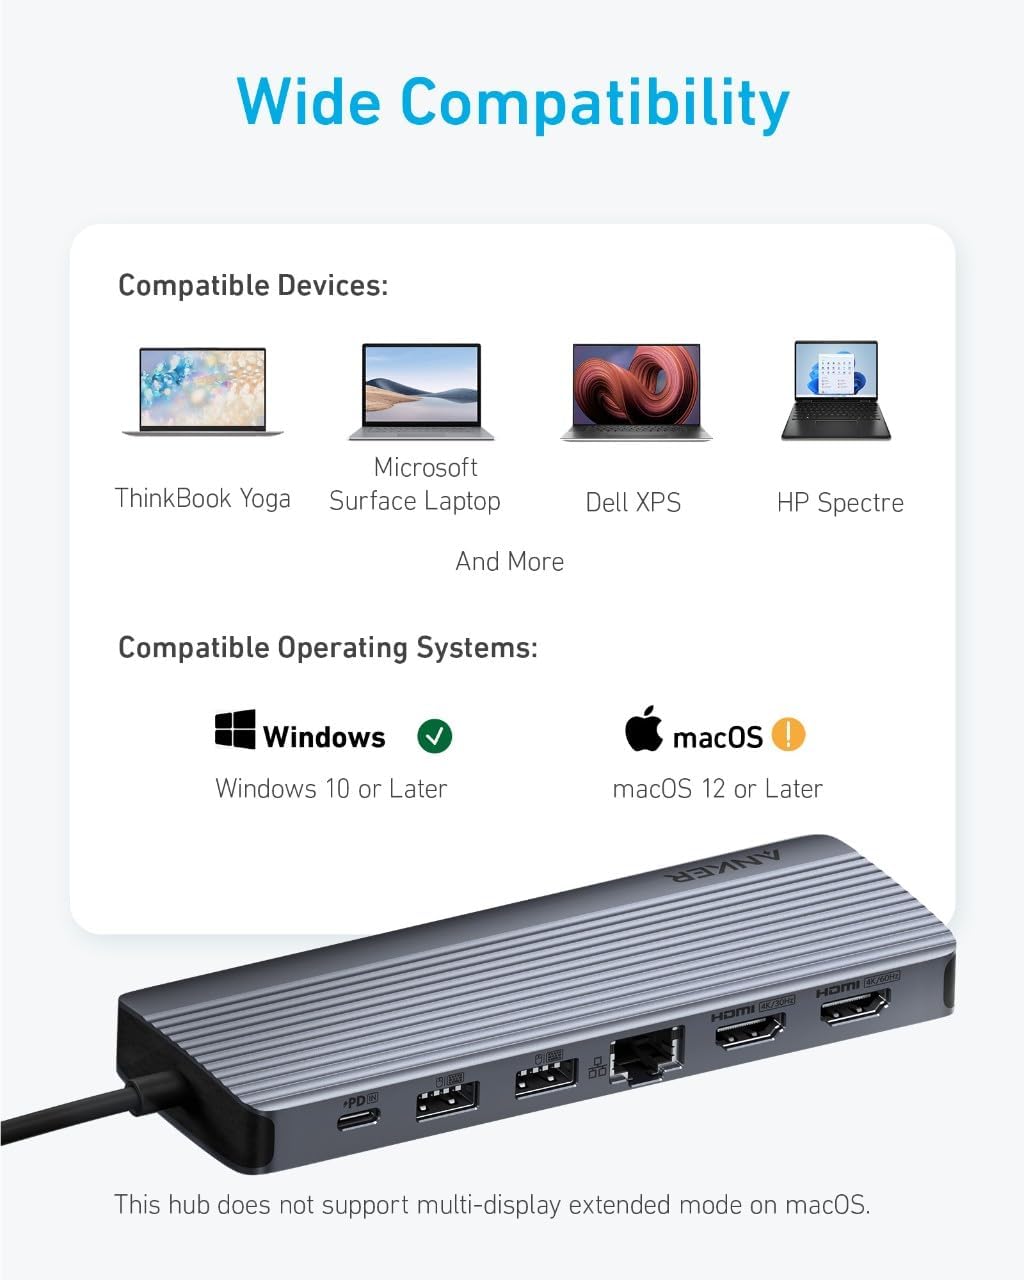 Anker Triple Display USB-C Hub 14 in 1 4K@60Hz HDMI with 100W Max Power Delivery